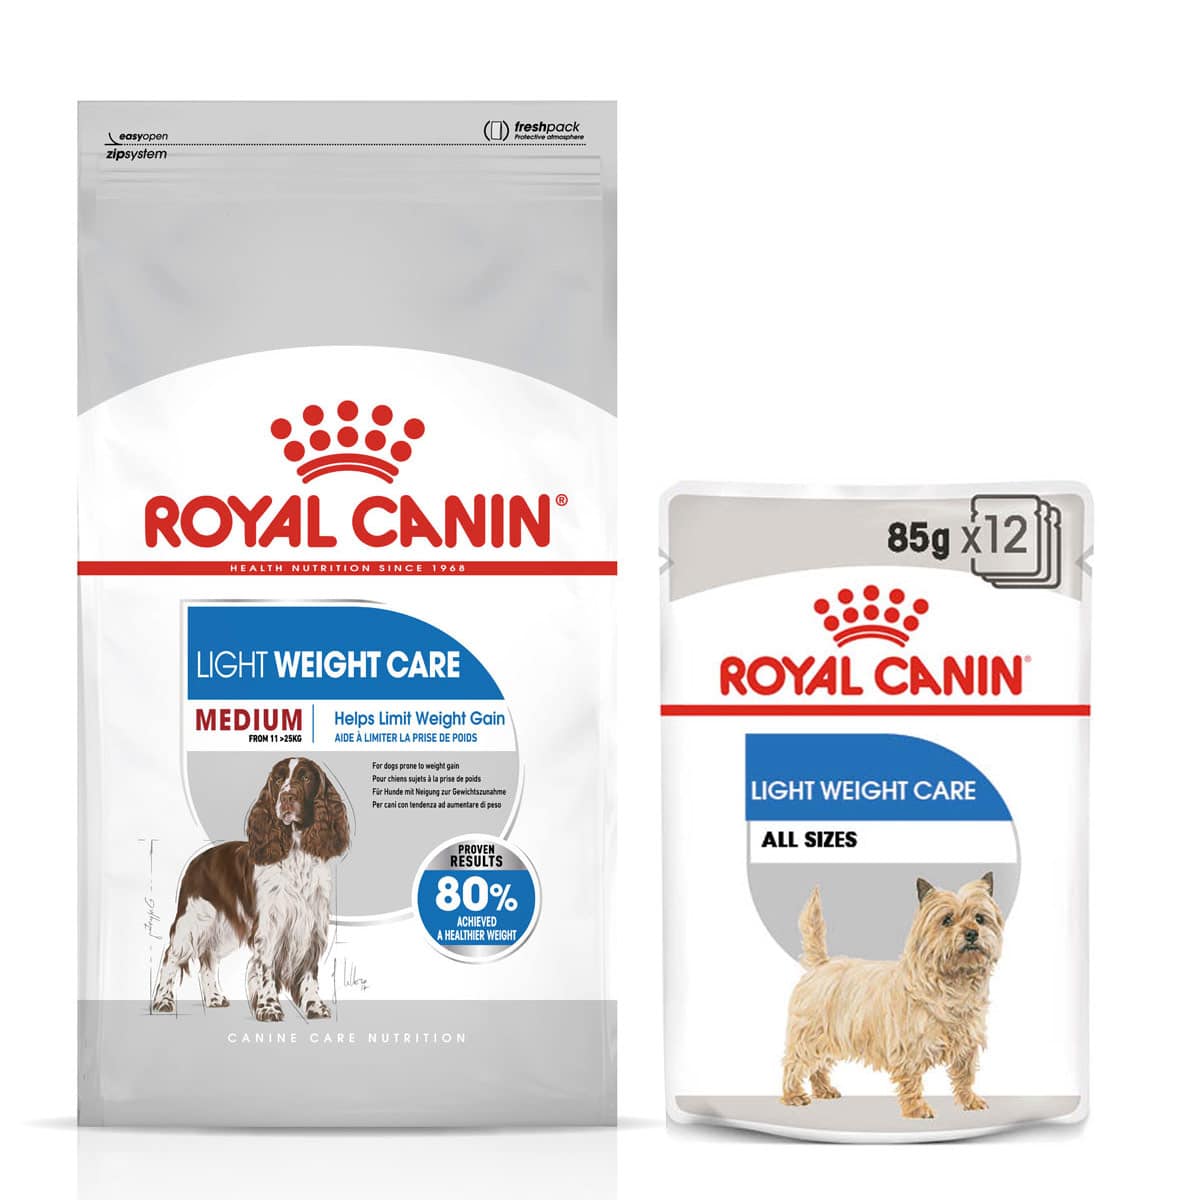 ROYAL CANIN LIGHT WEIGHT CARE MEDIUM 3kg + Mousse 12x85g